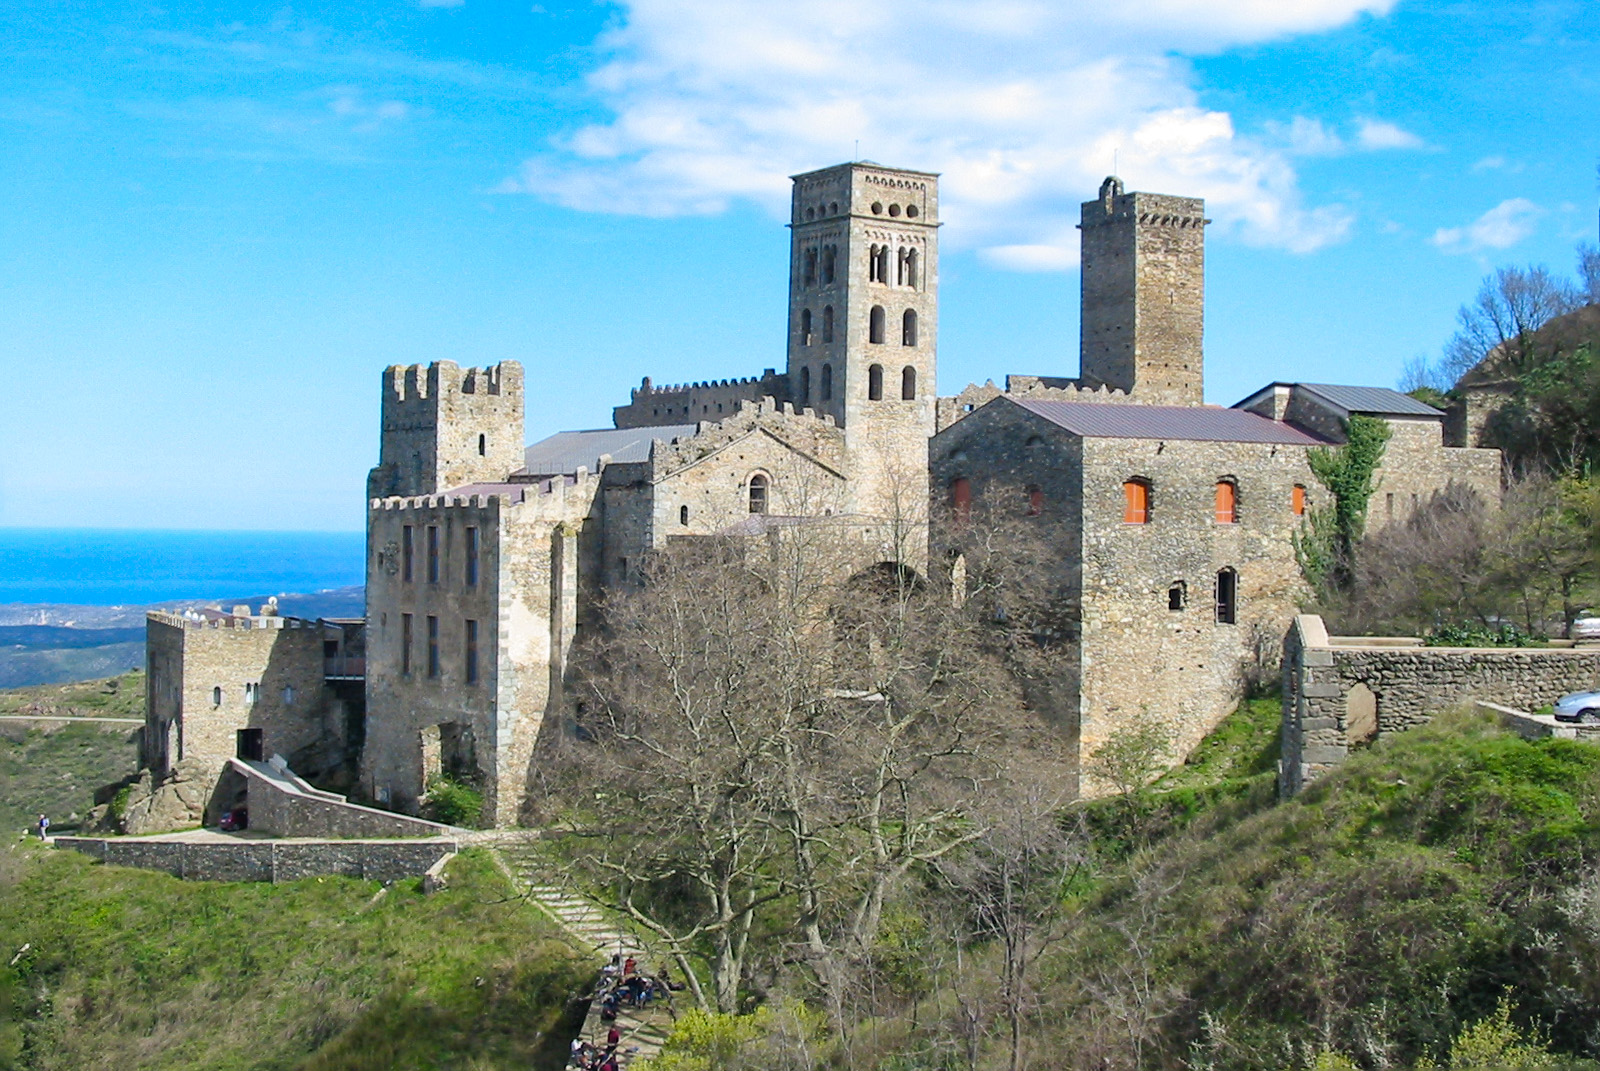 Sant Pere de Rodes © Gabriele Delhey - licence [CC BY-SA 2.0] from Wikimedia Commons